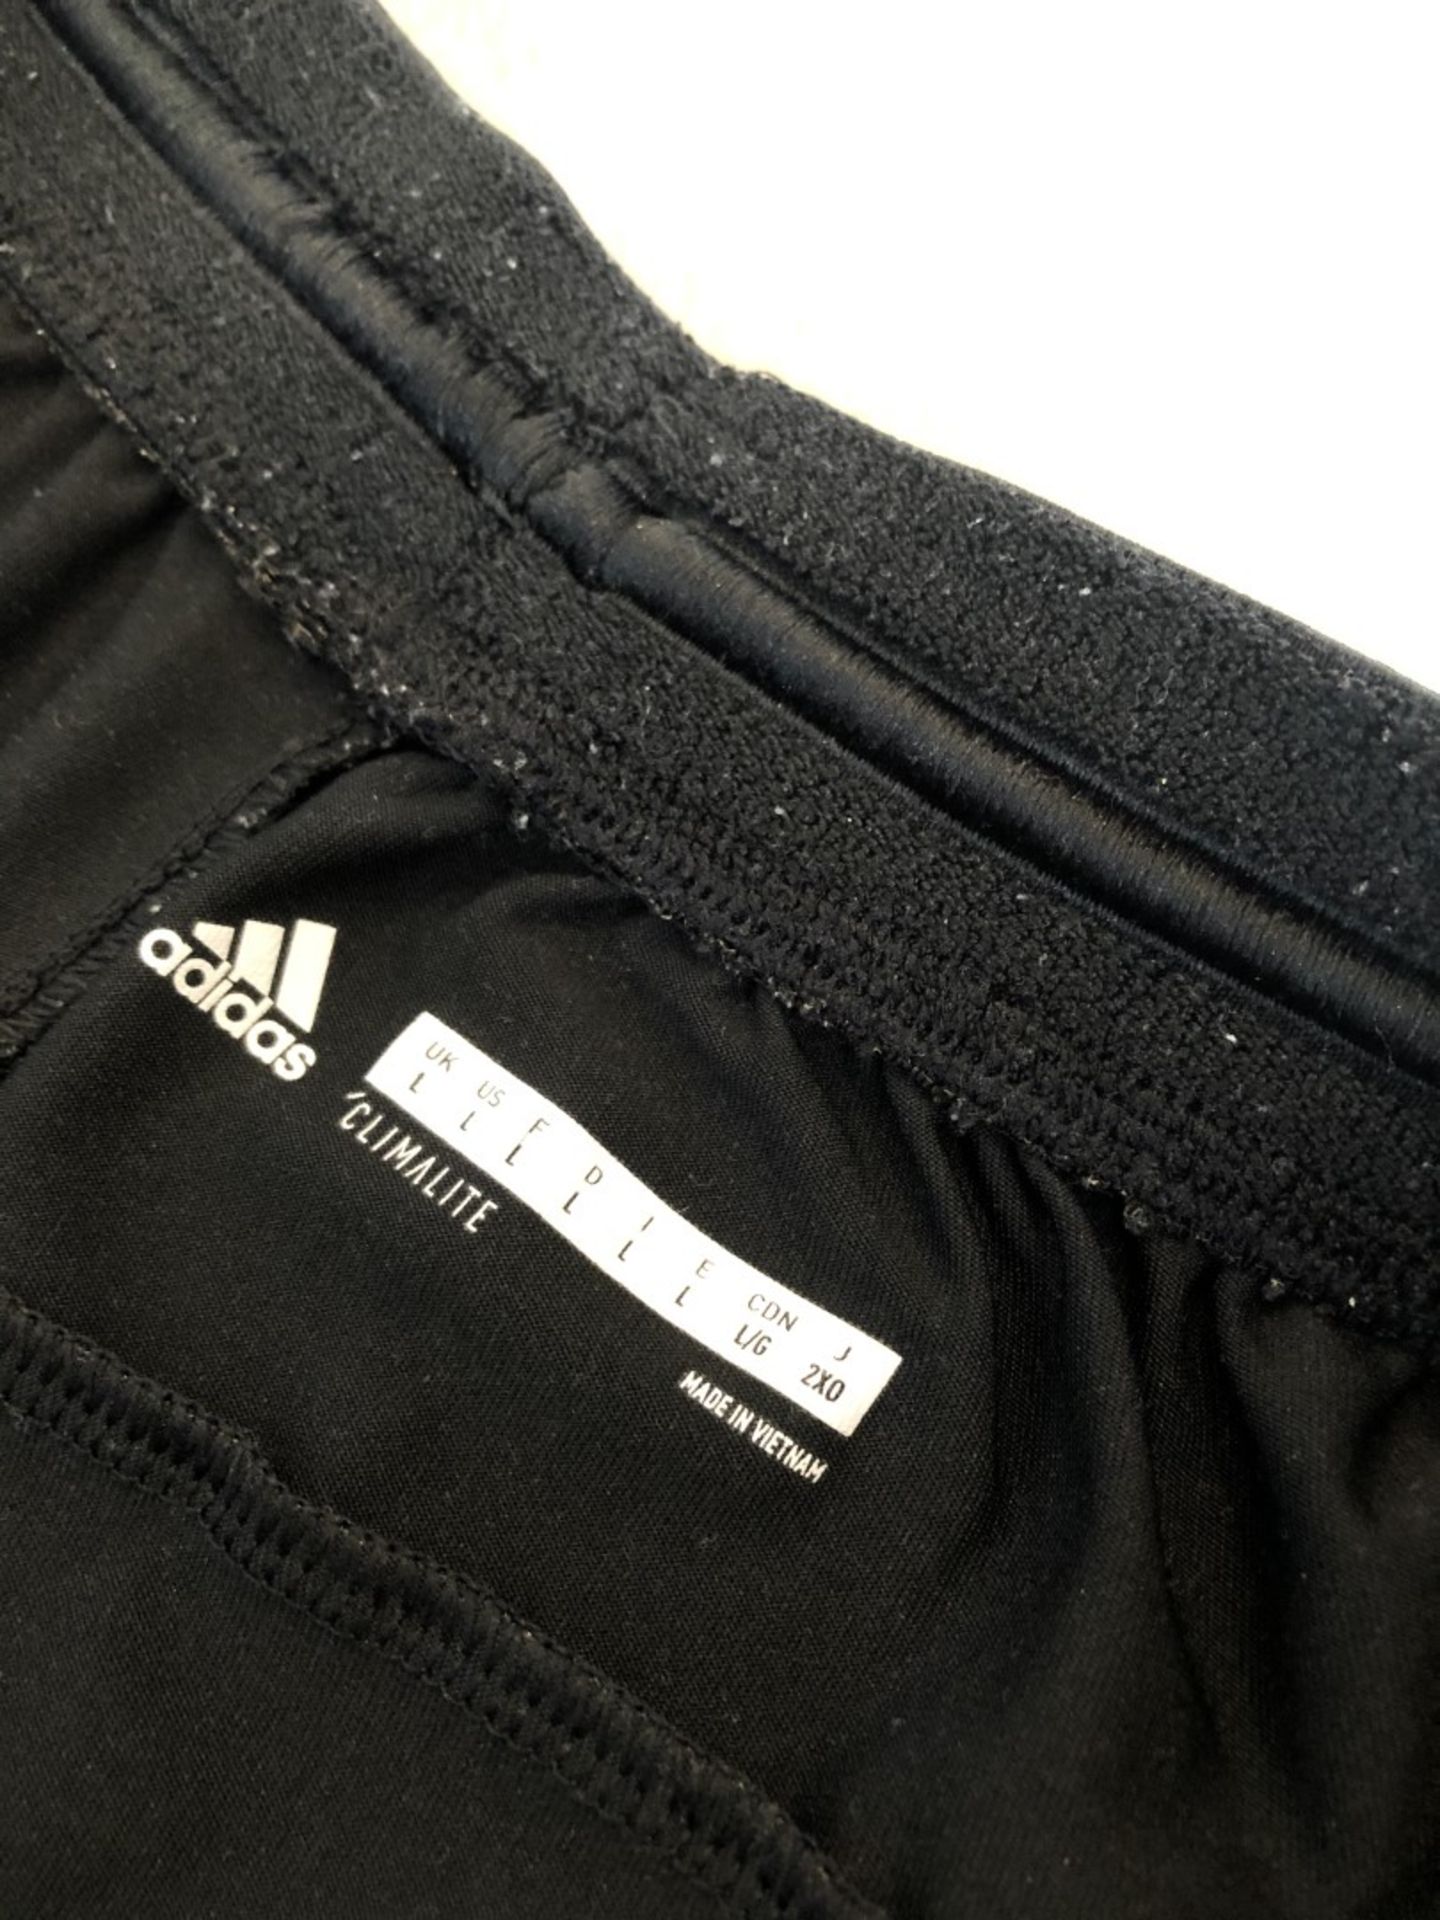 4 x Assorted Pairs Of Men's Genuine Adidas Shorts - AllIn Black - Sizes: L-XL - Preowned - Image 7 of 23